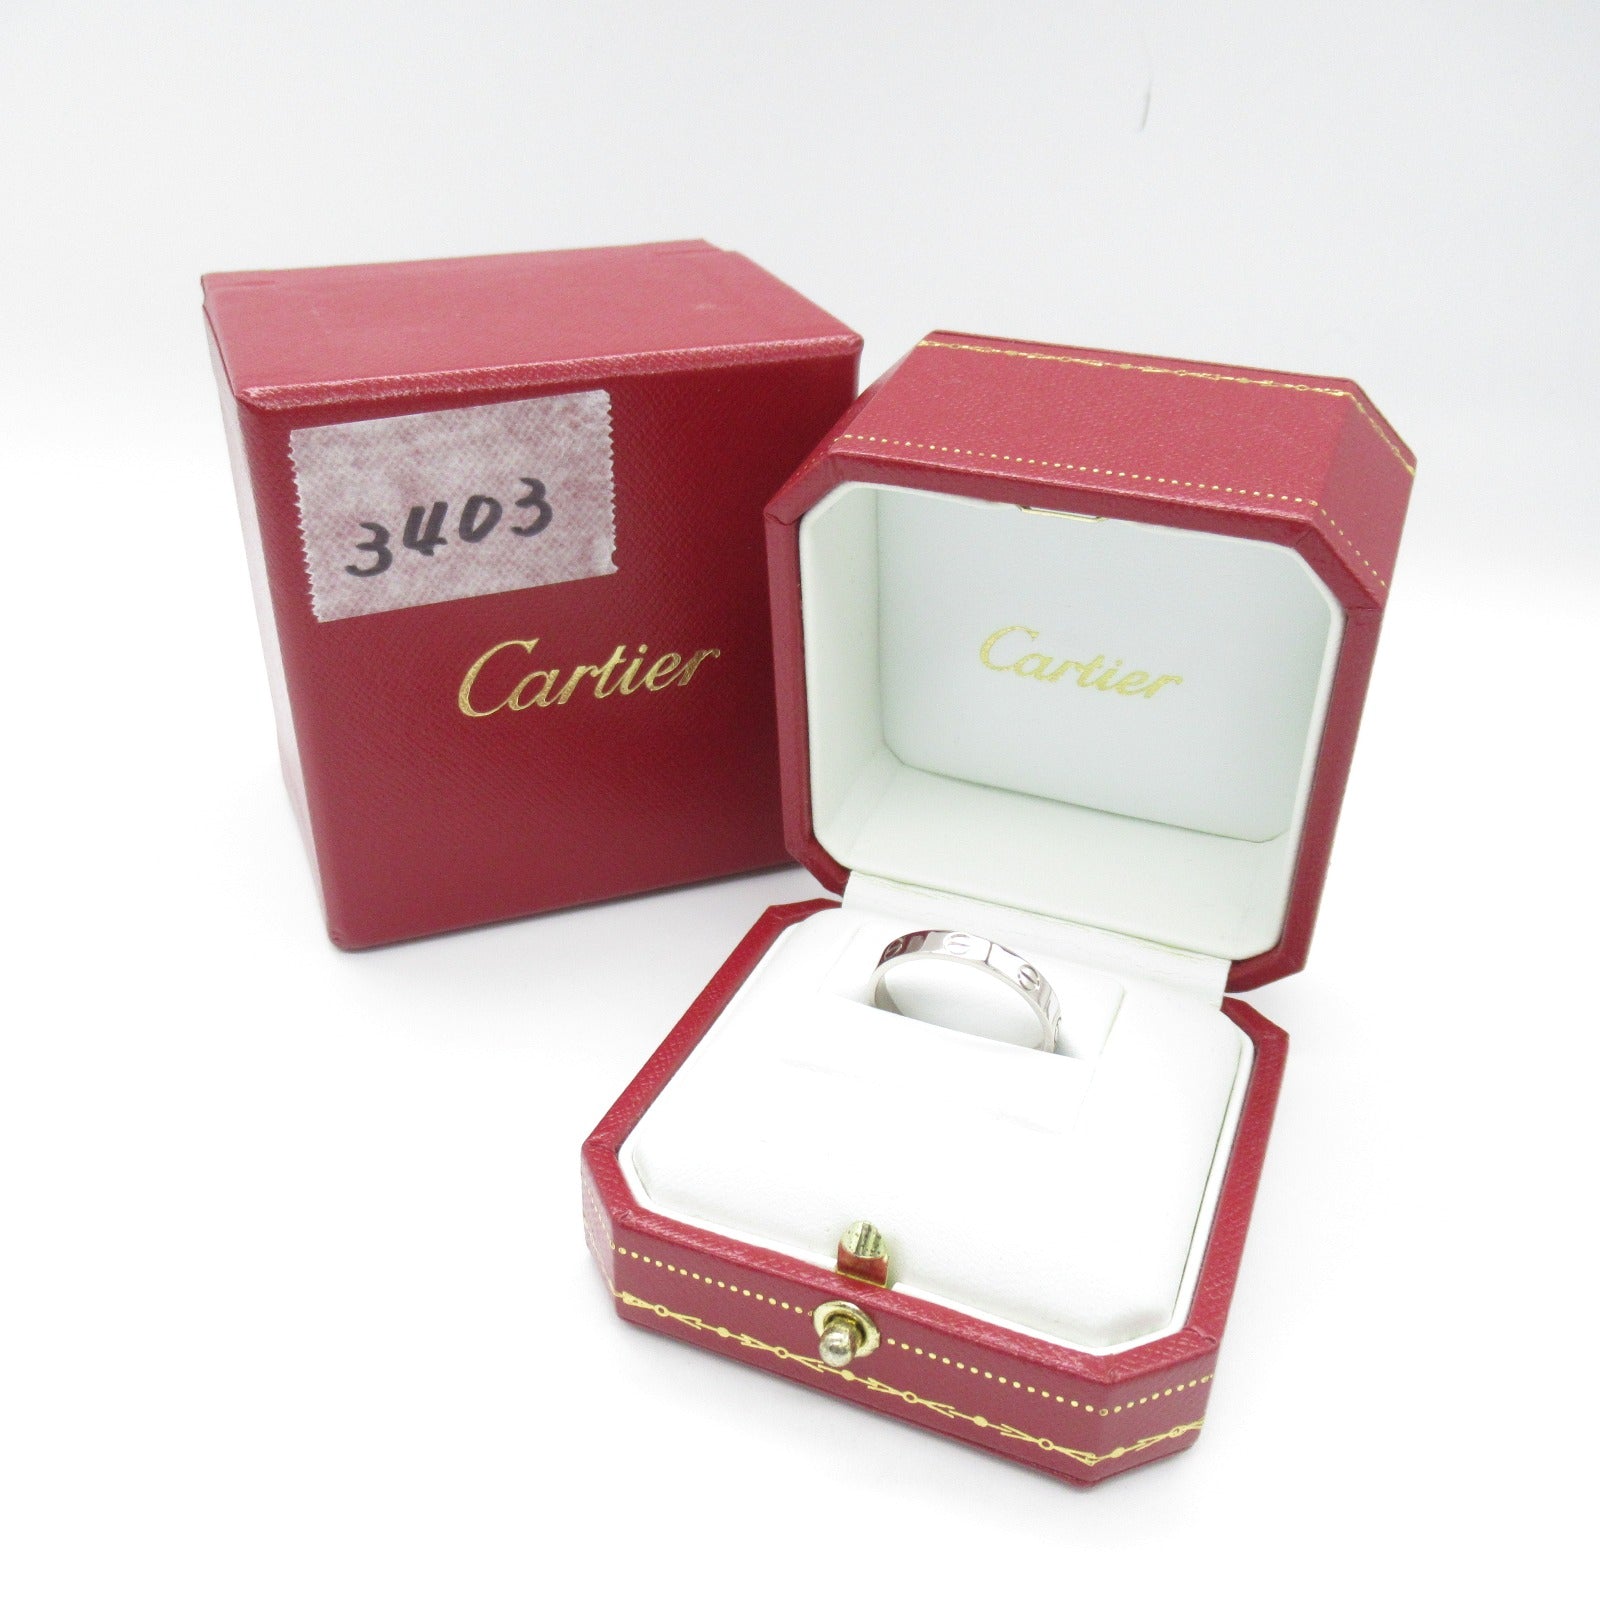 Cartier Cartier Mini-Love Ring Ring Jewelry K18WG (White G)   Silver B4085100